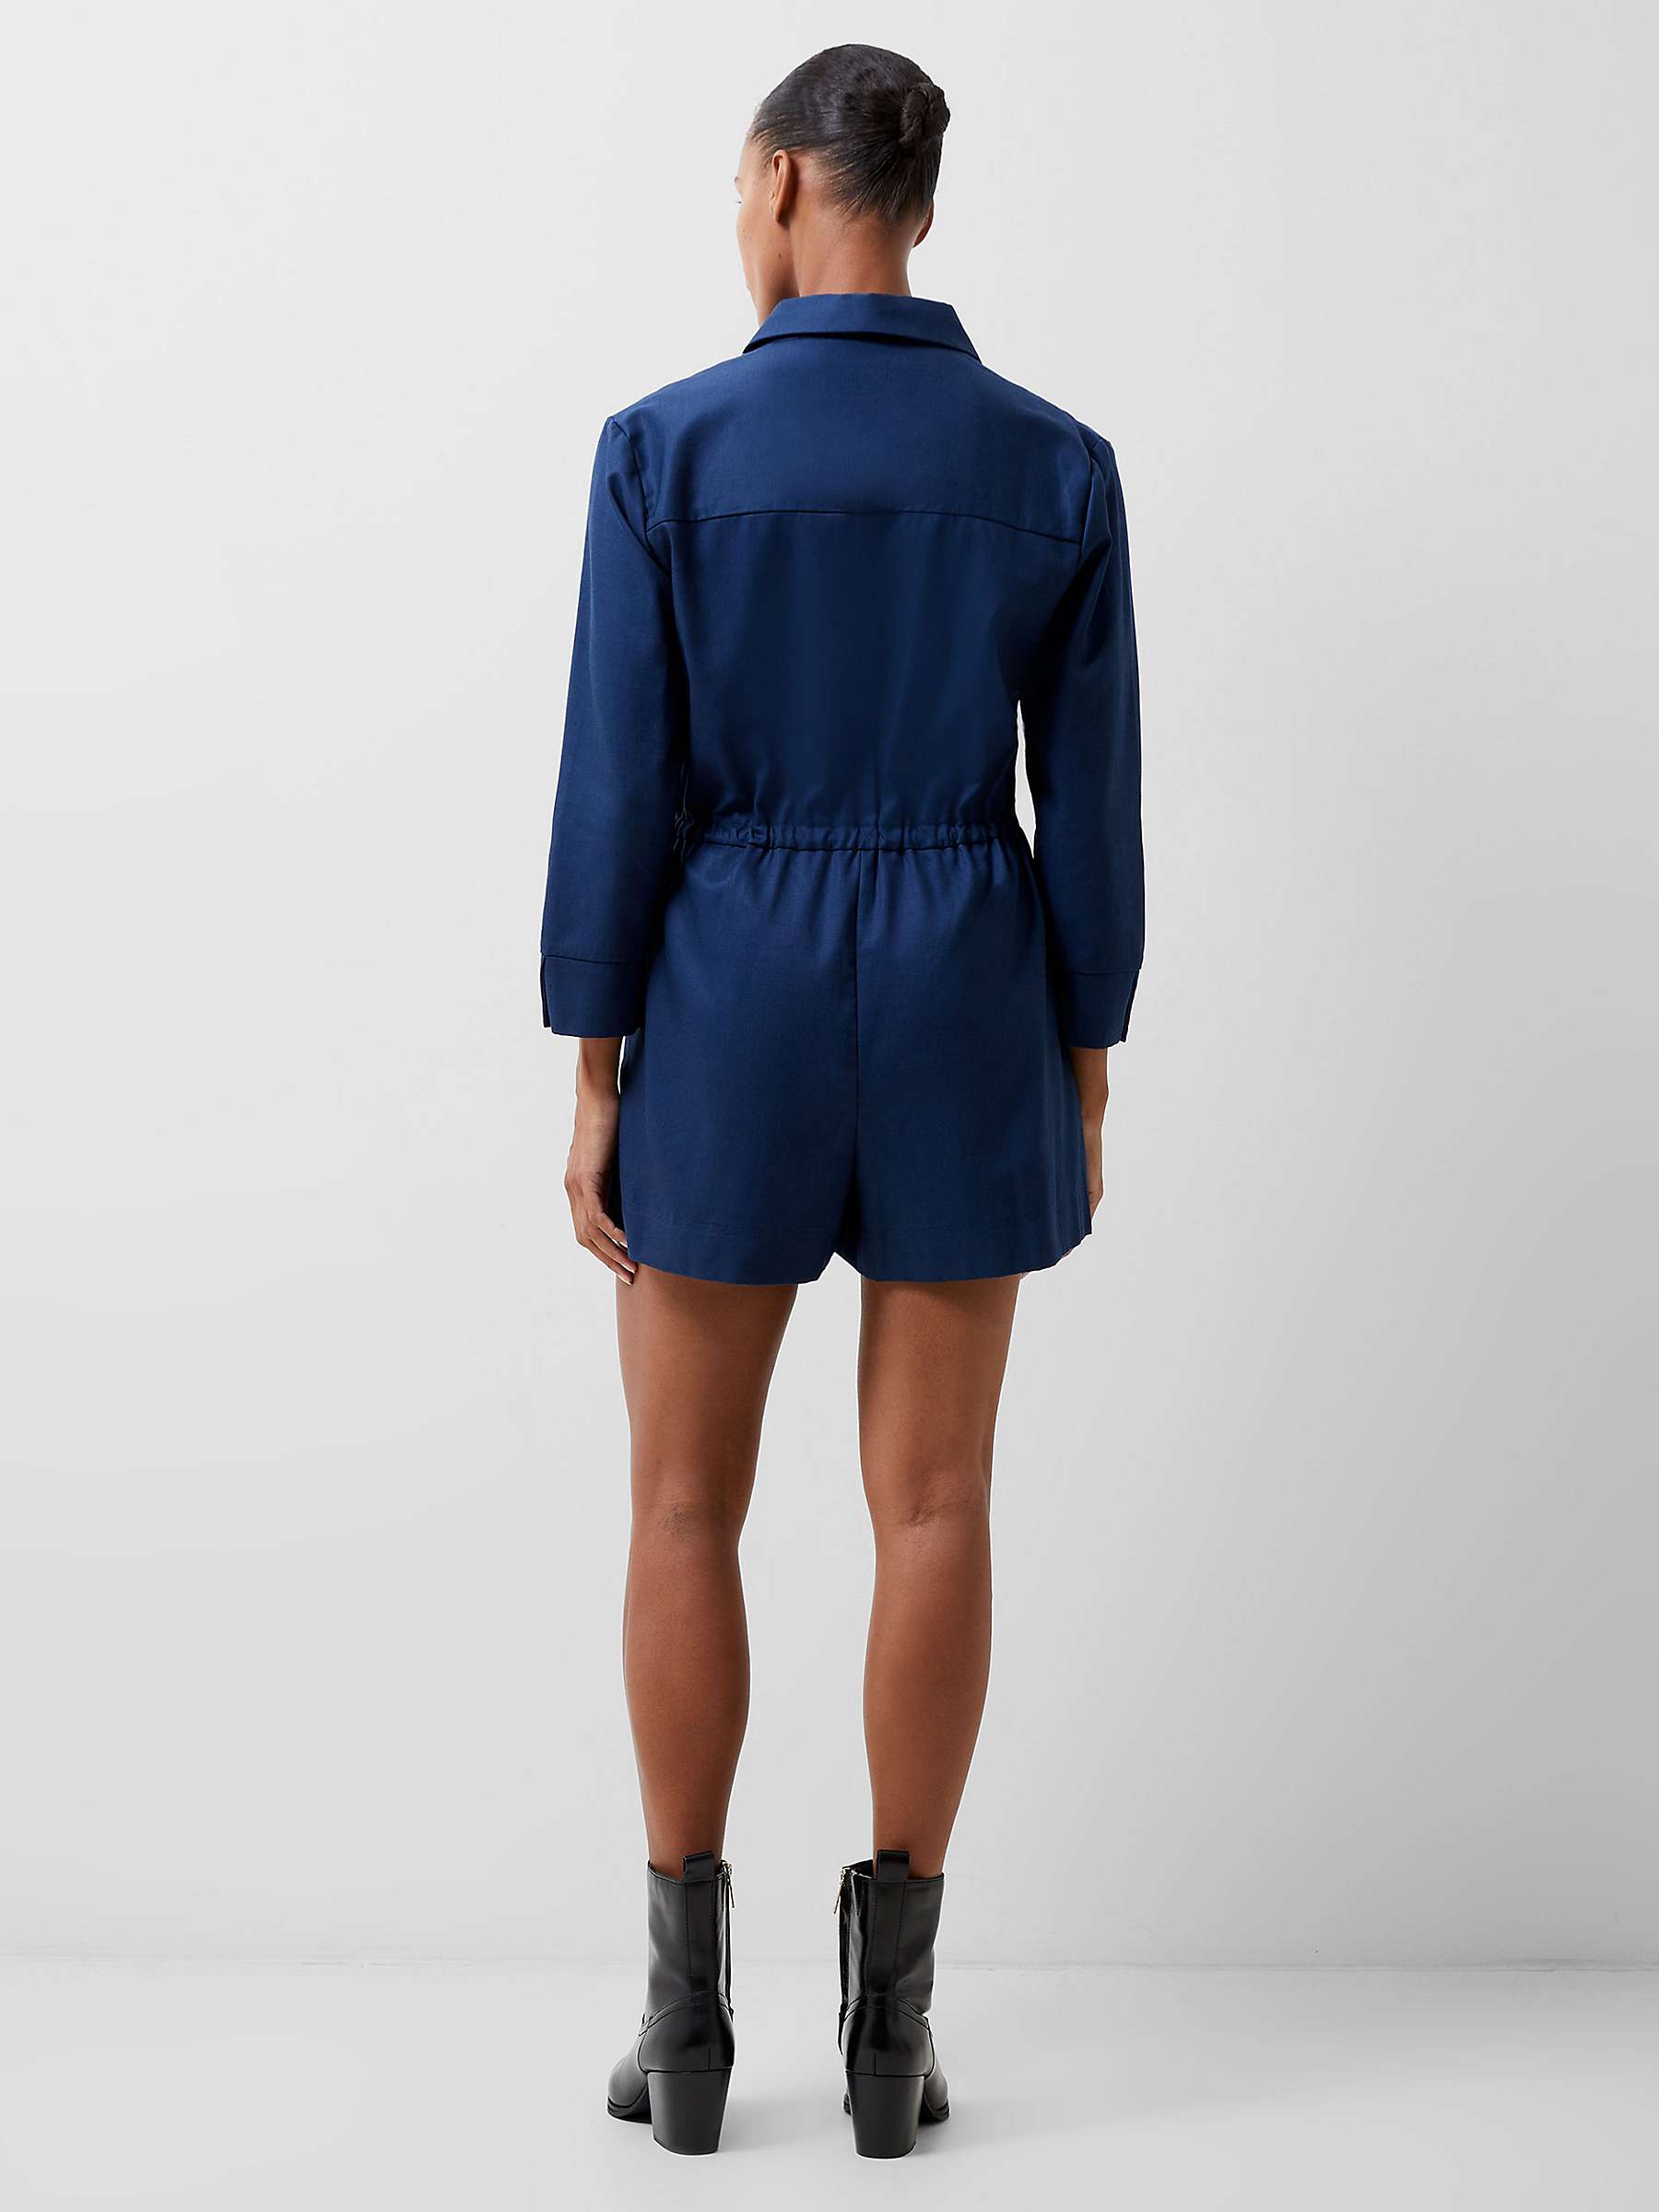 Buy French Connection Bodie Shirt Playsuit, Midnight Blue Online at johnlewis.com